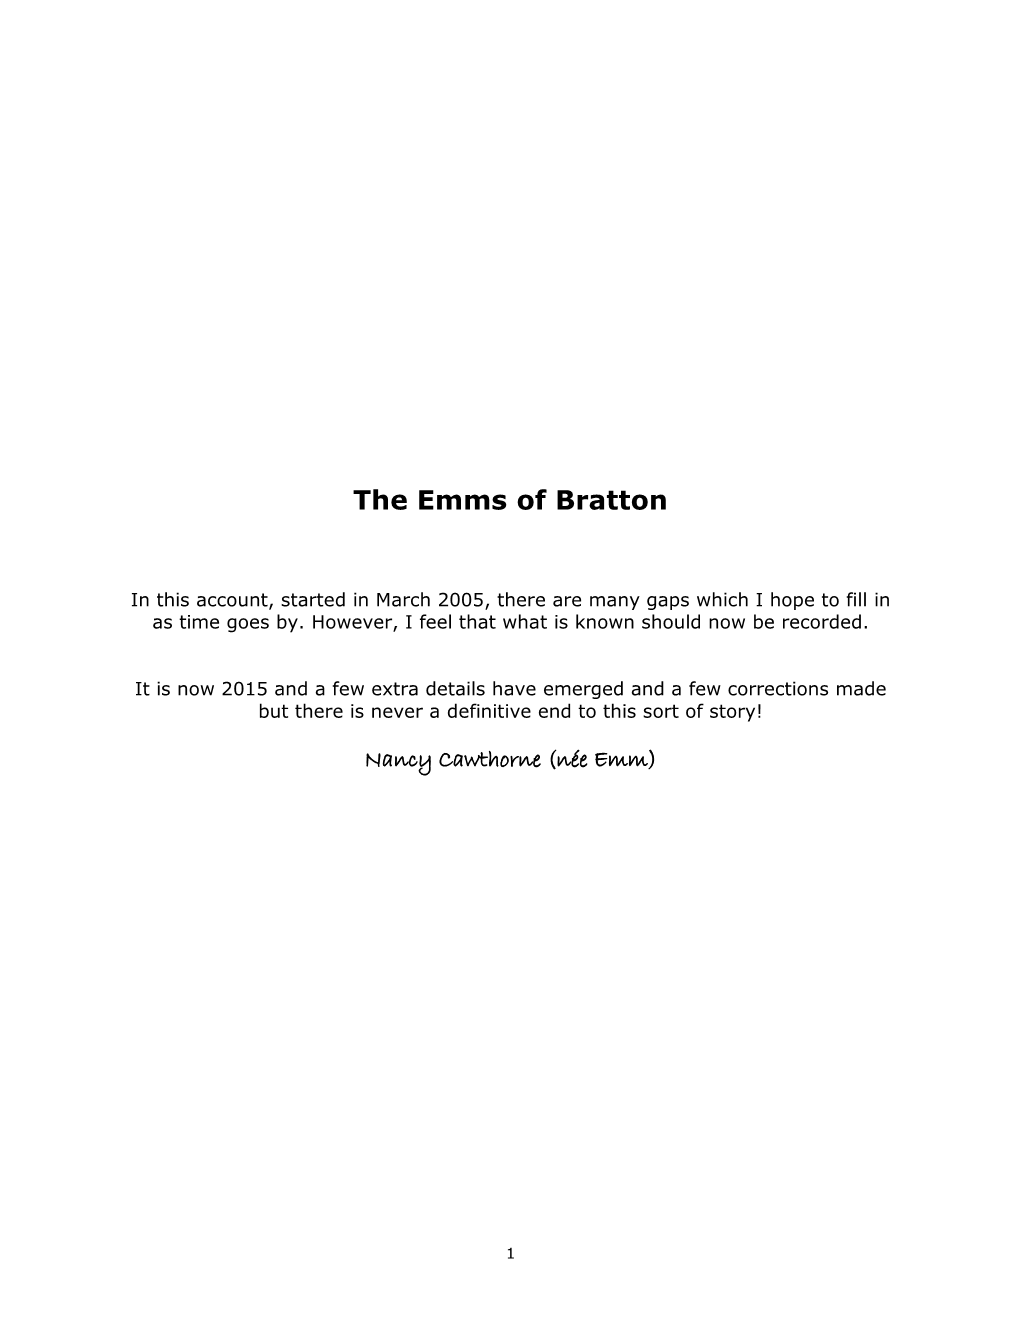 The Emms of Bratton